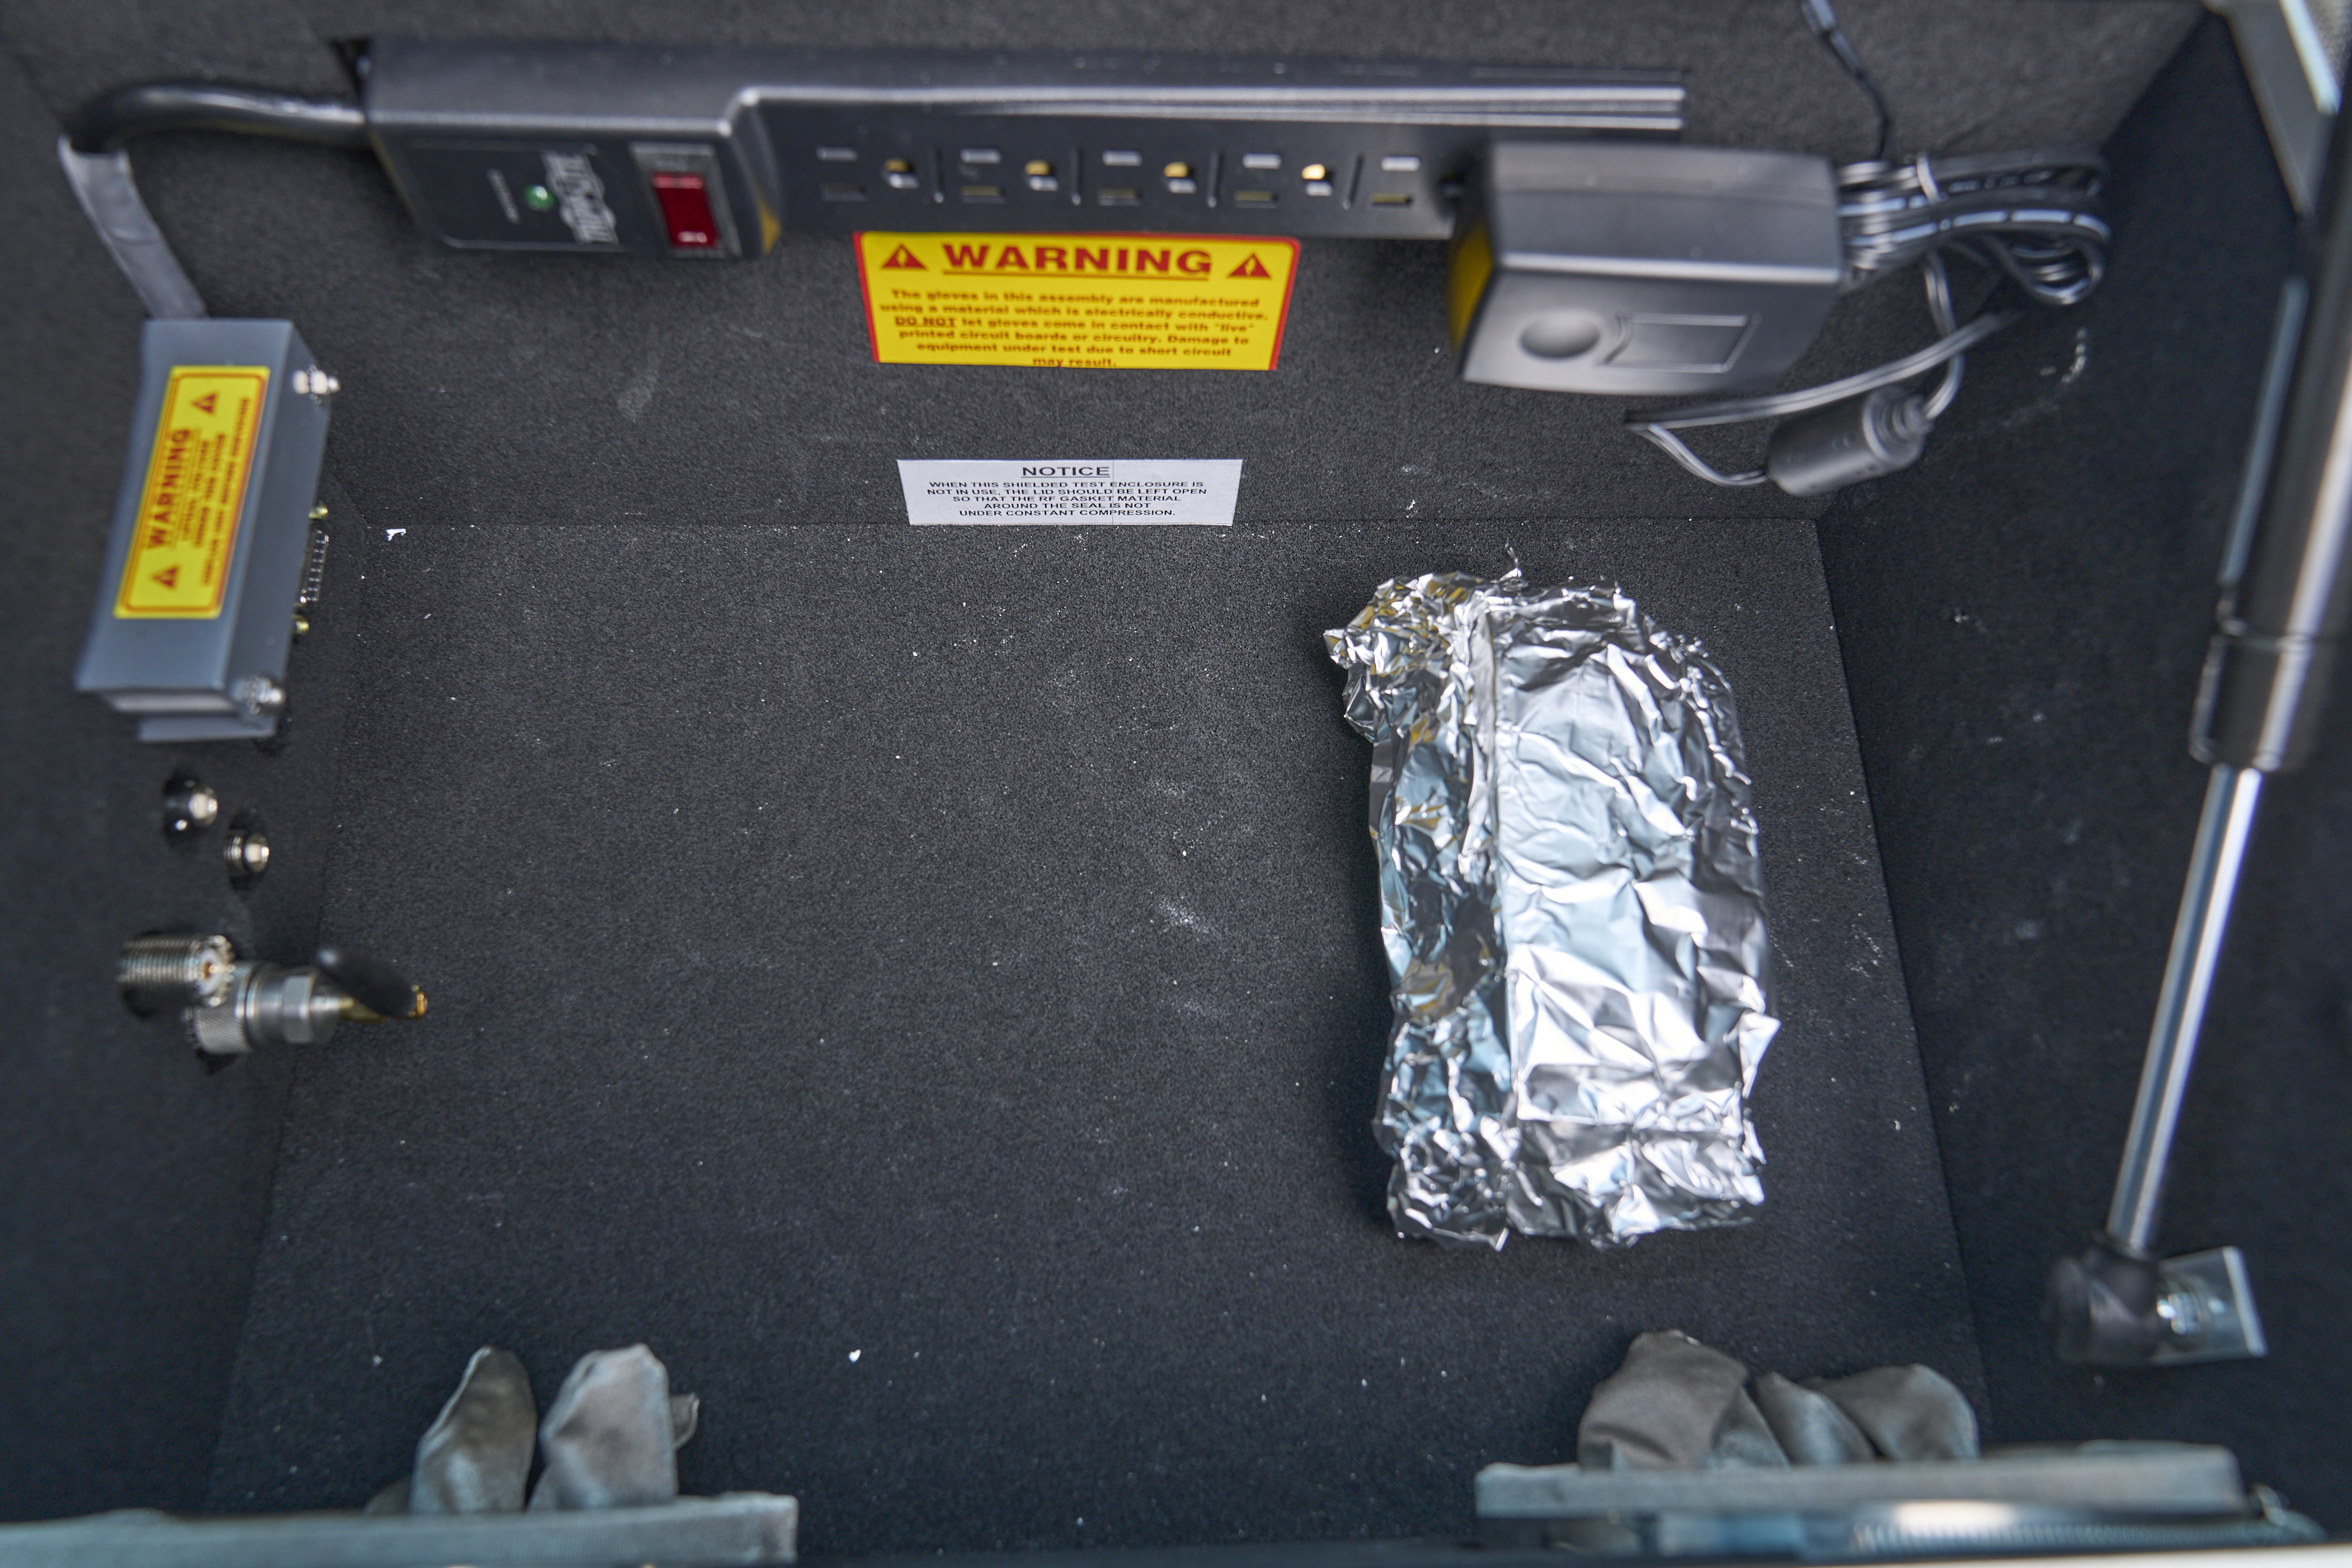 Photo: The inside of the RF test chamber, with a tinfoil package that looks like a very carefully wrapped half-eaten burrito.